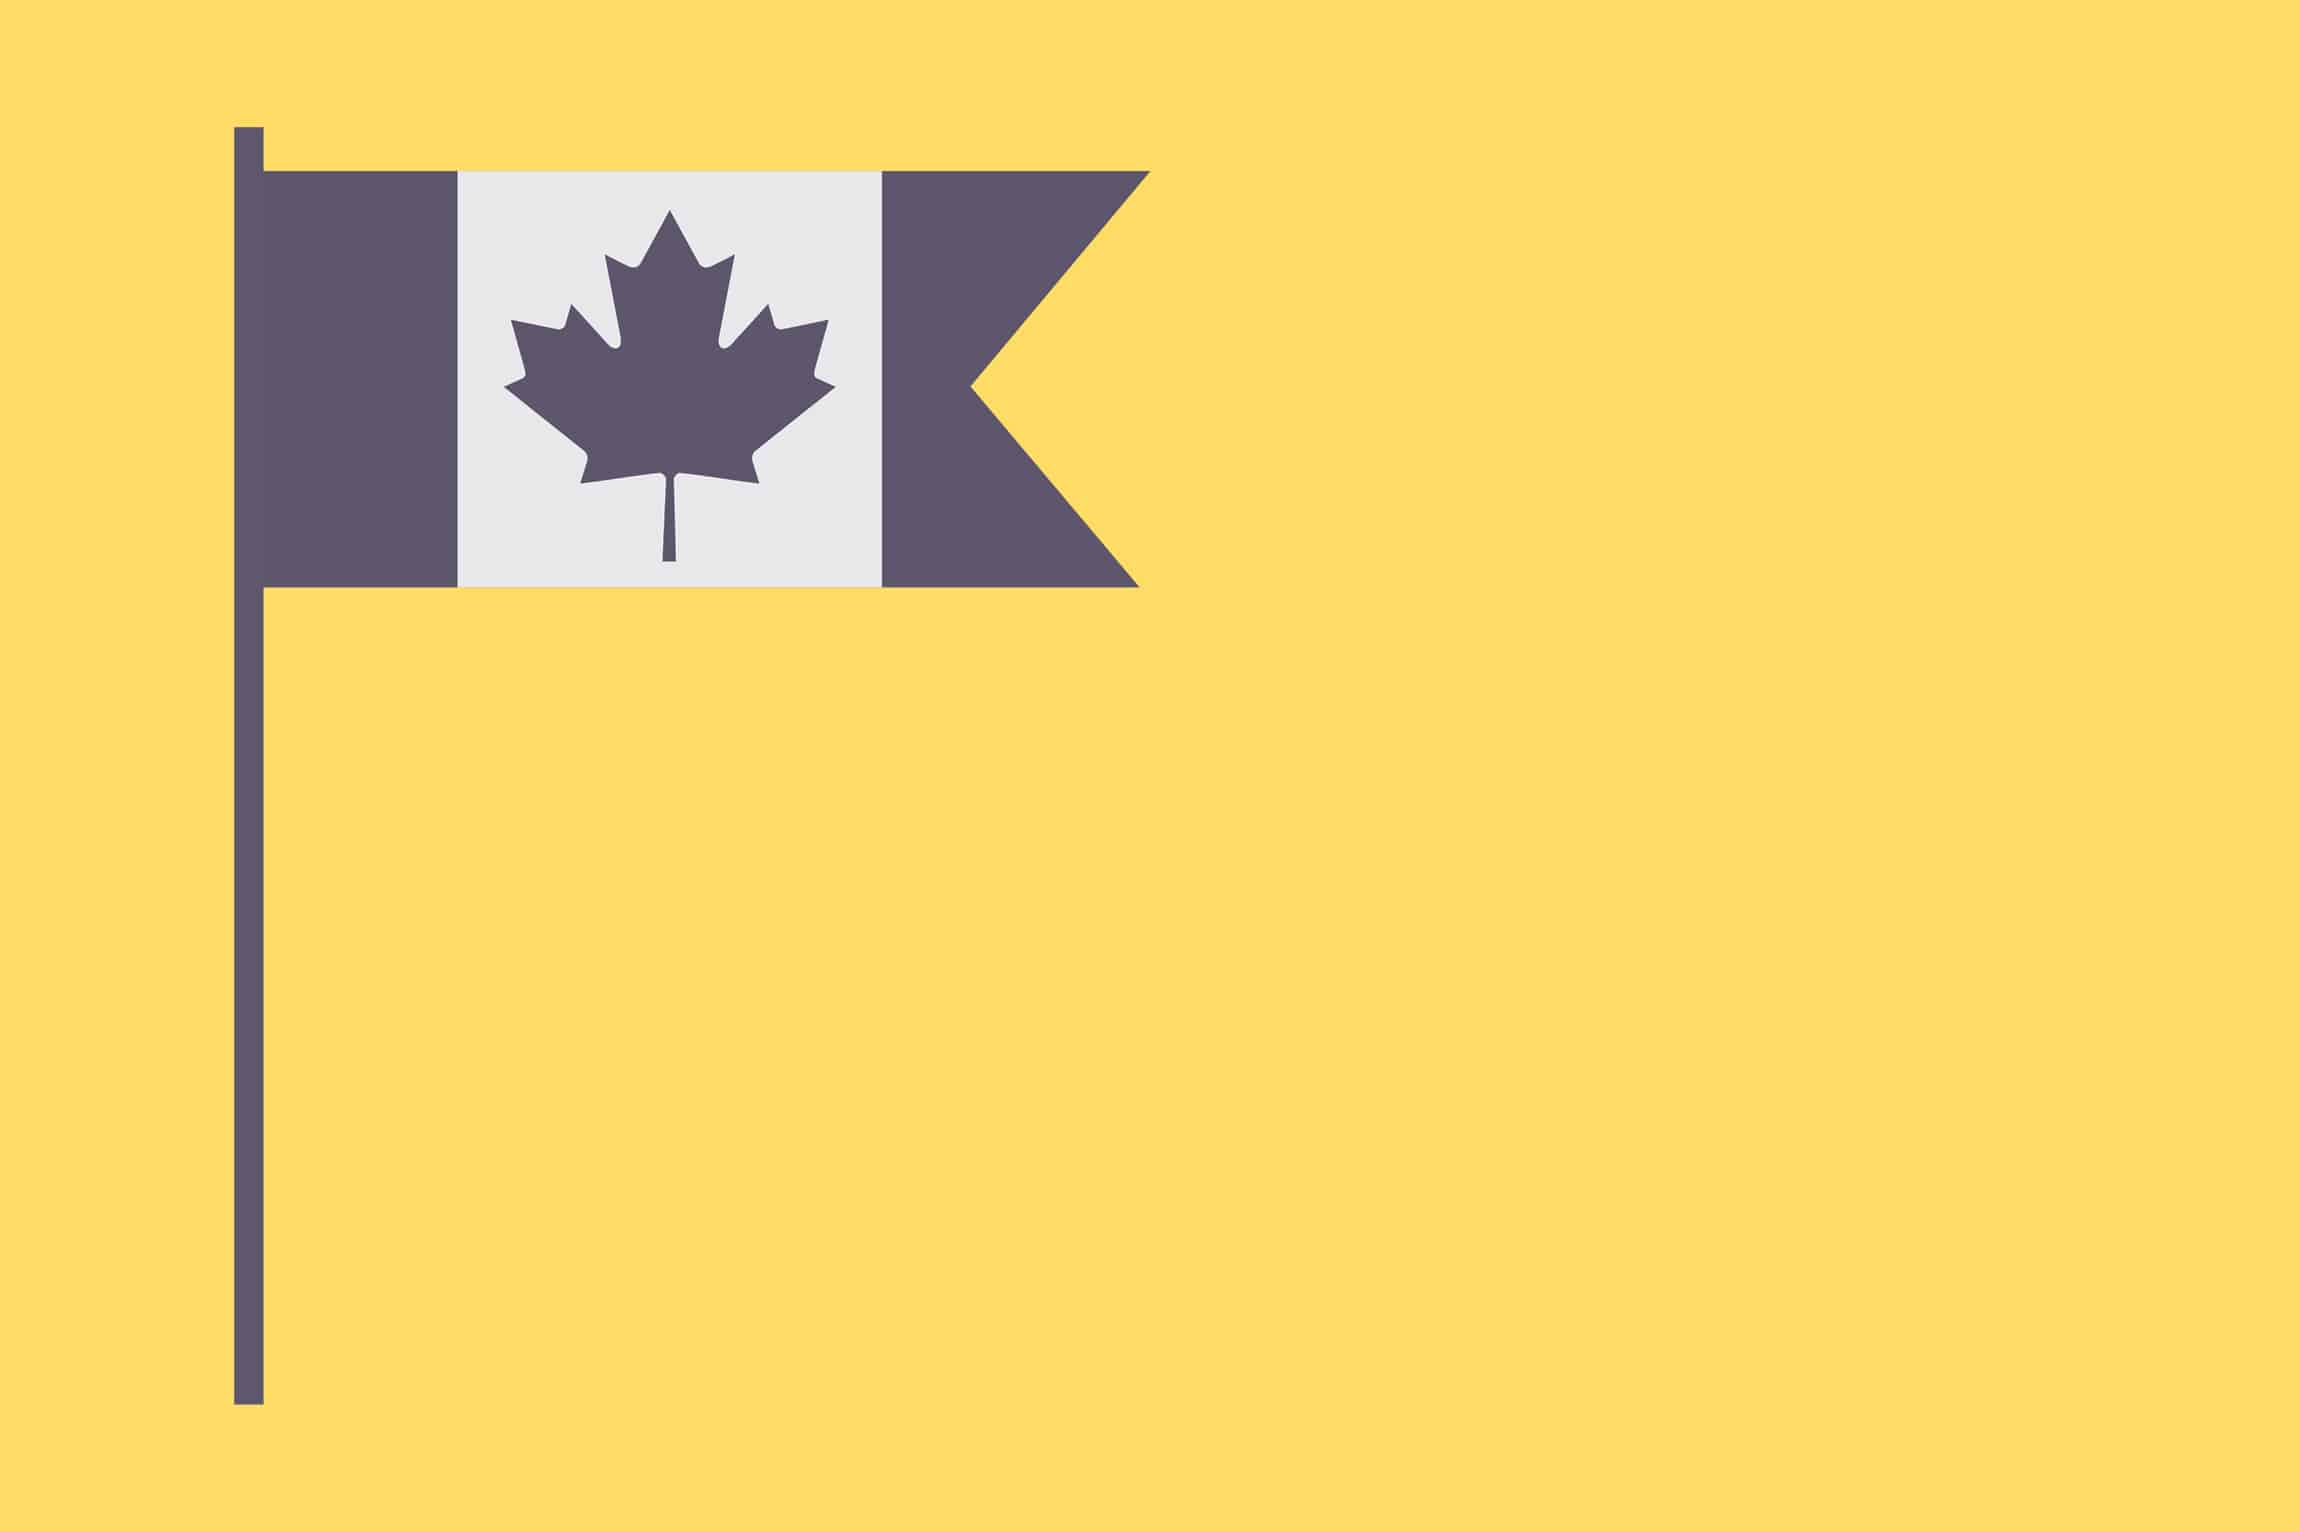 Canadian flag with a yellow background